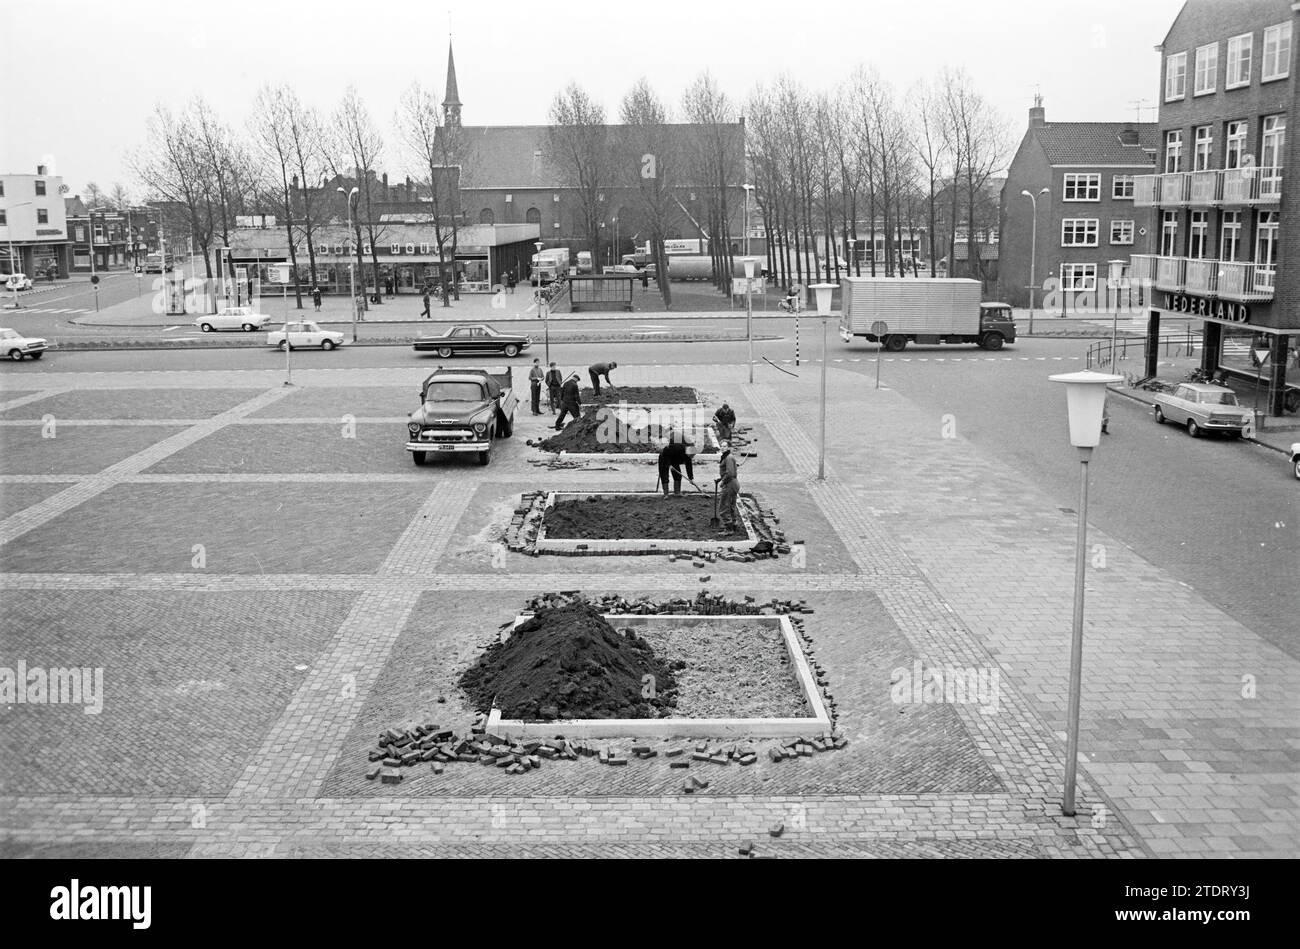 Construction of parking lot and public gardens opposite Albert Heijn., Whizgle News from the Past, Tailored for the Future. Explore historical narratives, Dutch The Netherlands agency image with a modern perspective, bridging the gap between yesterday's events and tomorrow's insights. A timeless journey shaping the stories that shape our future Stock Photo